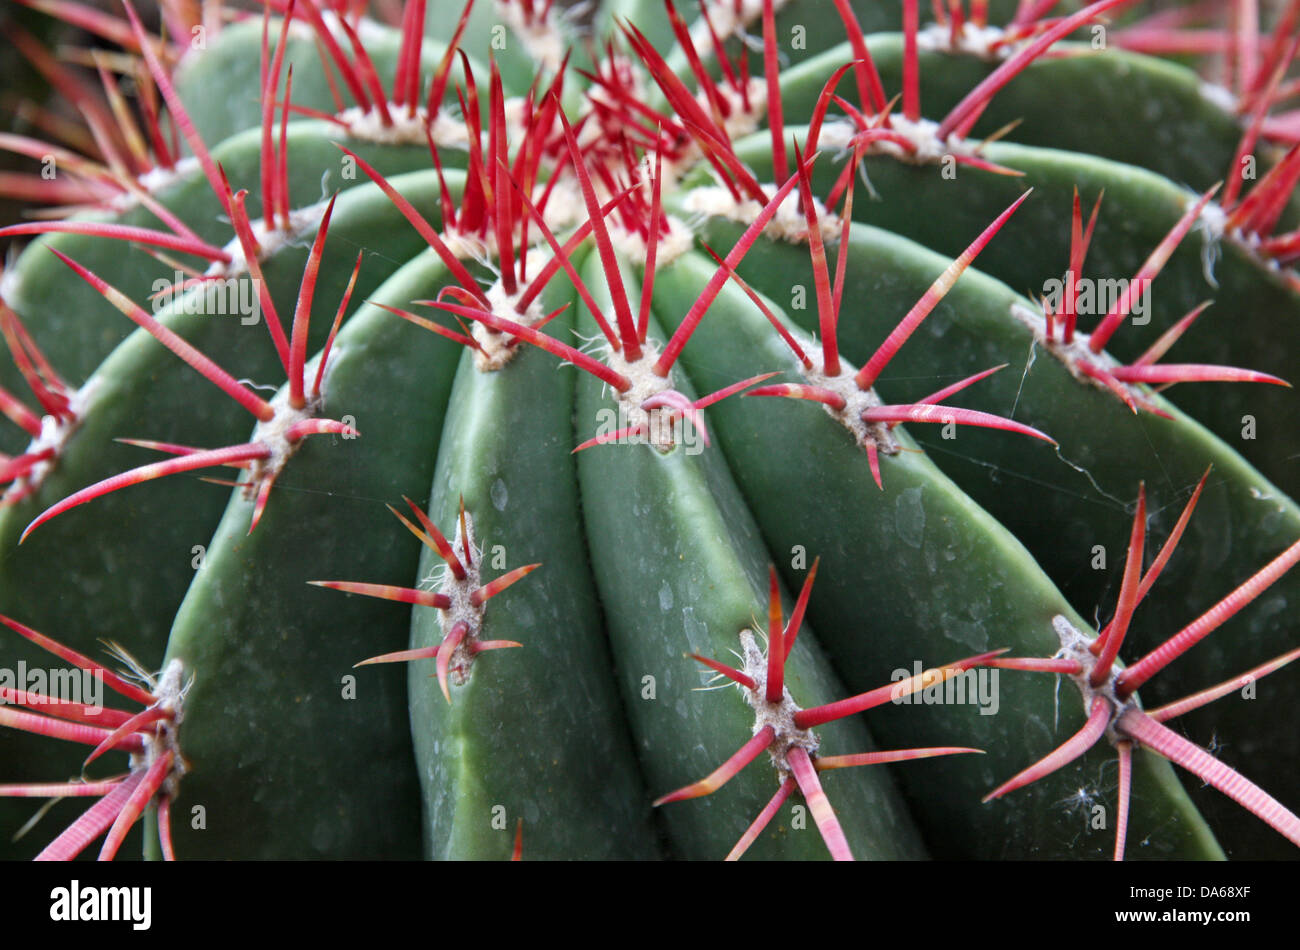 Quills and prickly cactus red spines of a very dangerous succulent plant Stock Photo